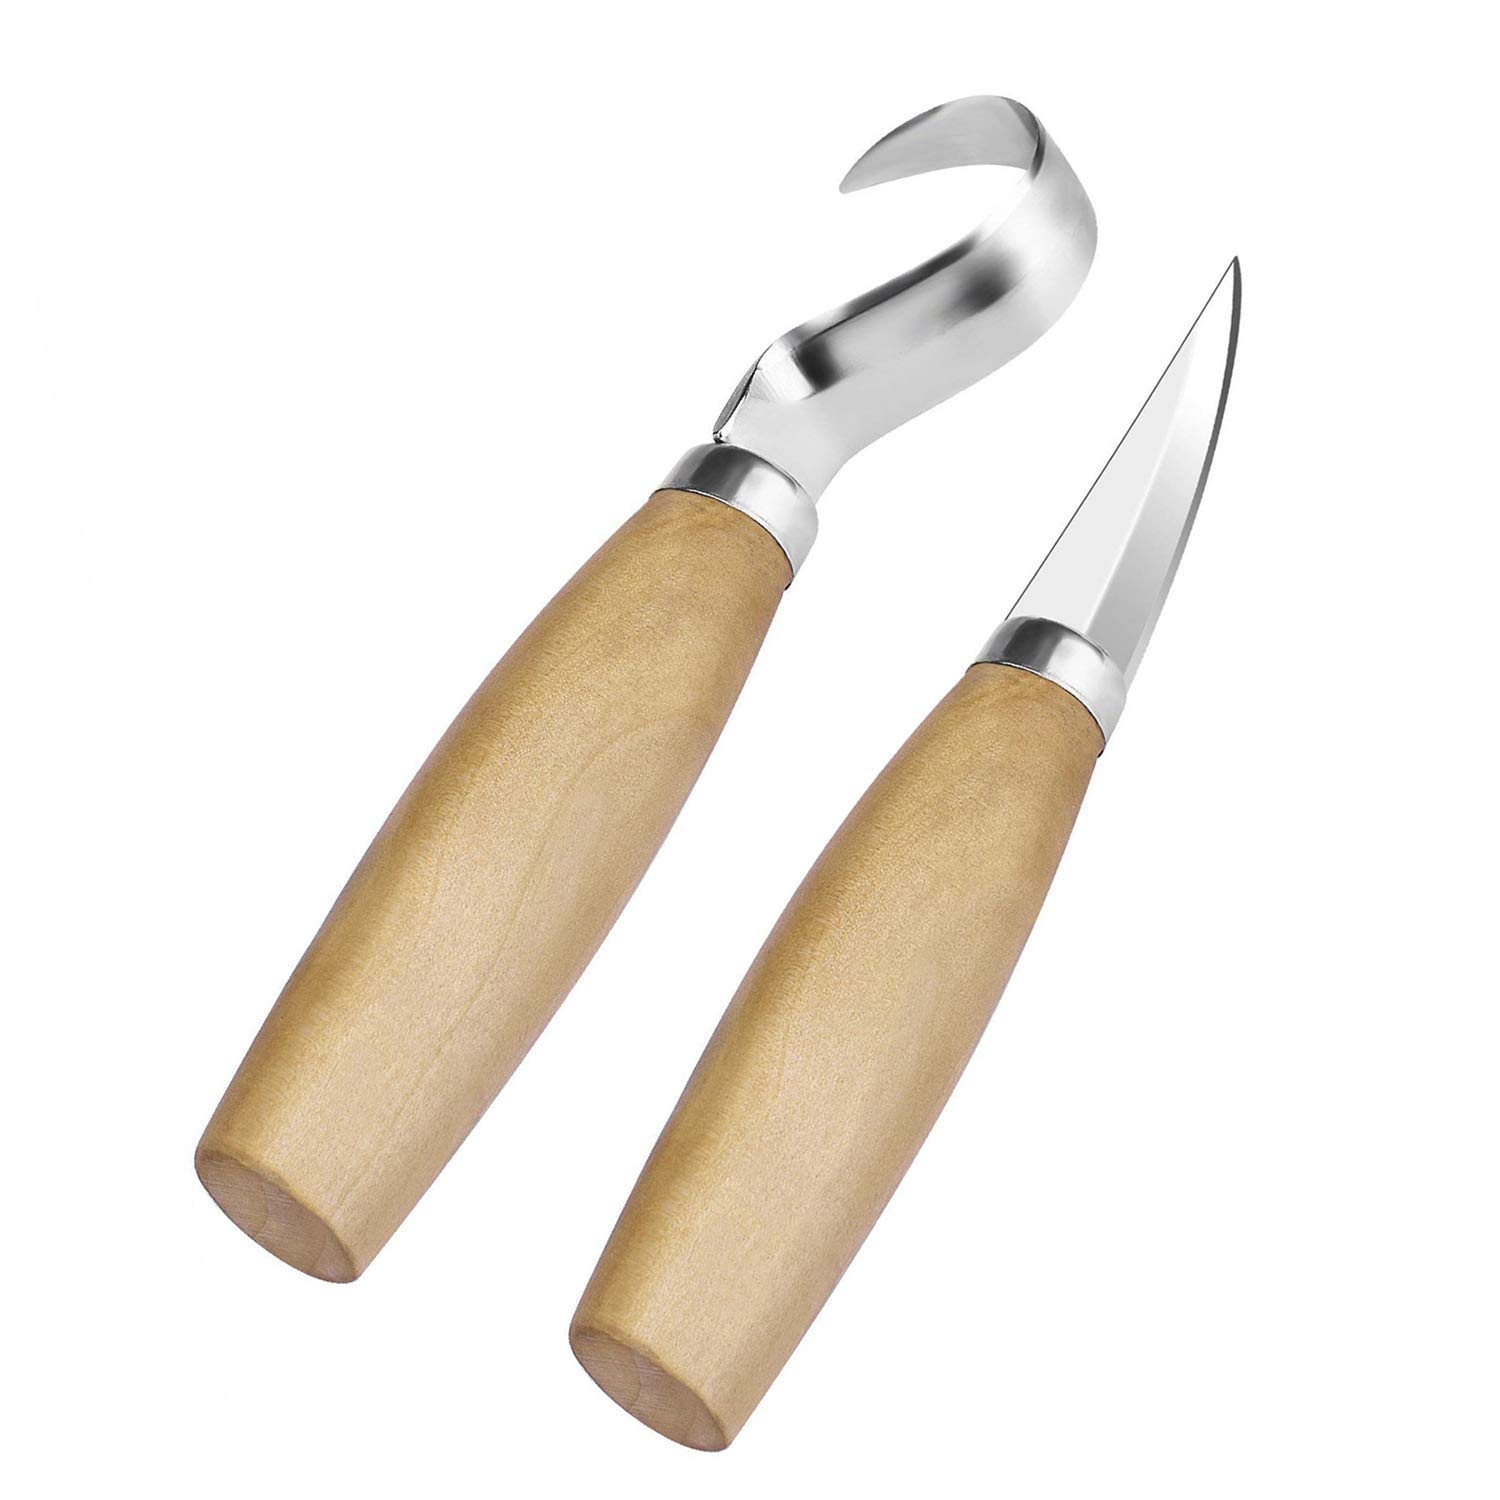 2 Pcs Wood Carving Knife DIY Chisel Woodworking Cutter 